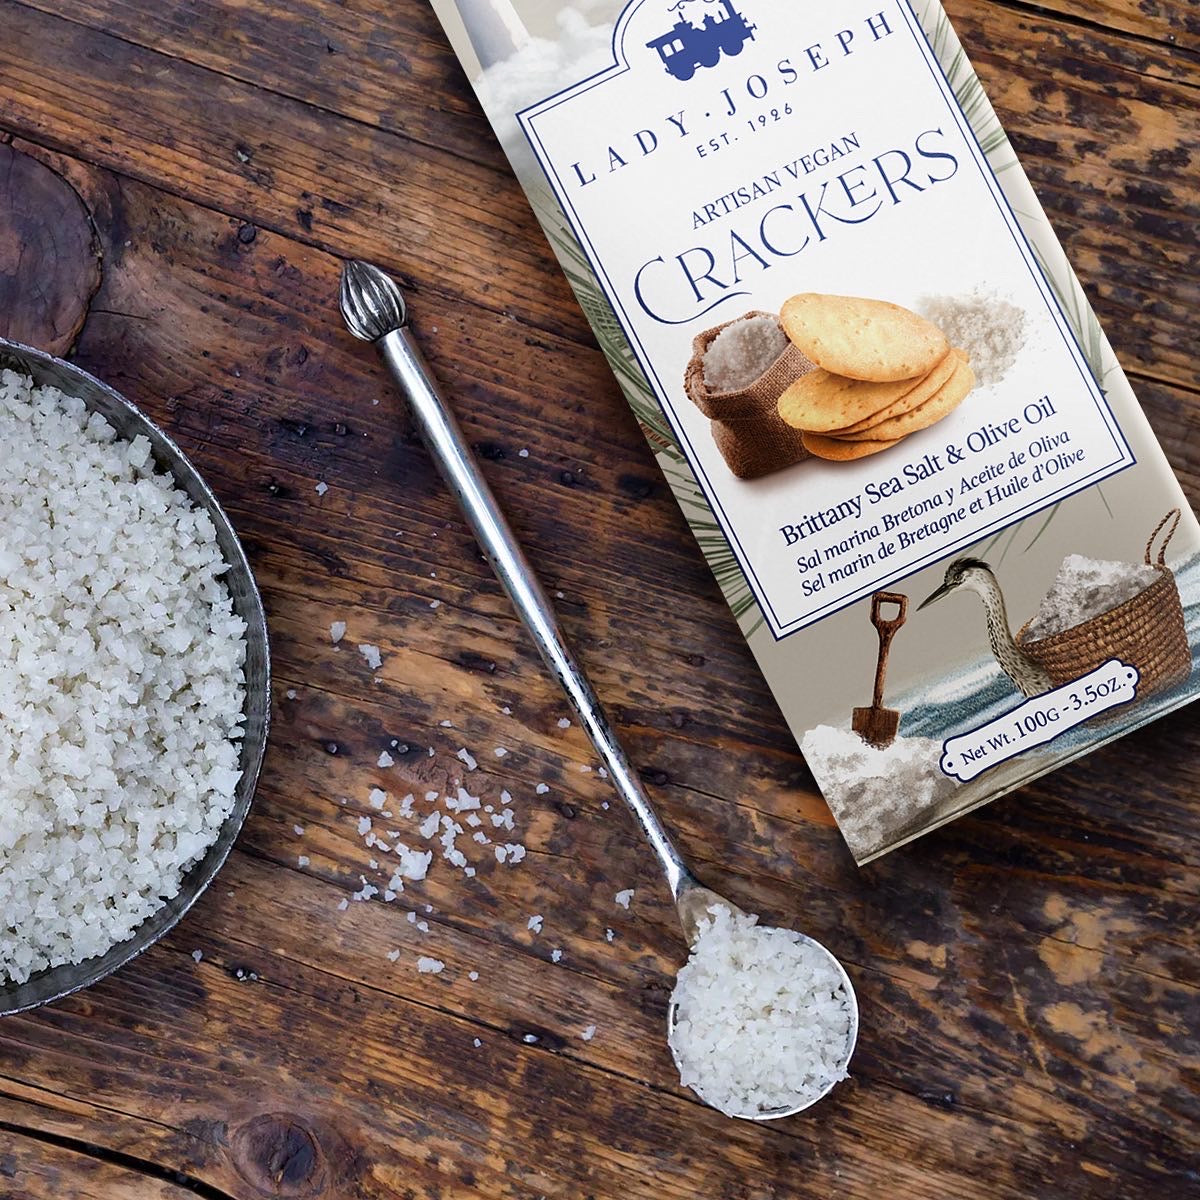 Handmade Vegan Crackers with Sea Salt from Guérande (France) and Olive Oil.